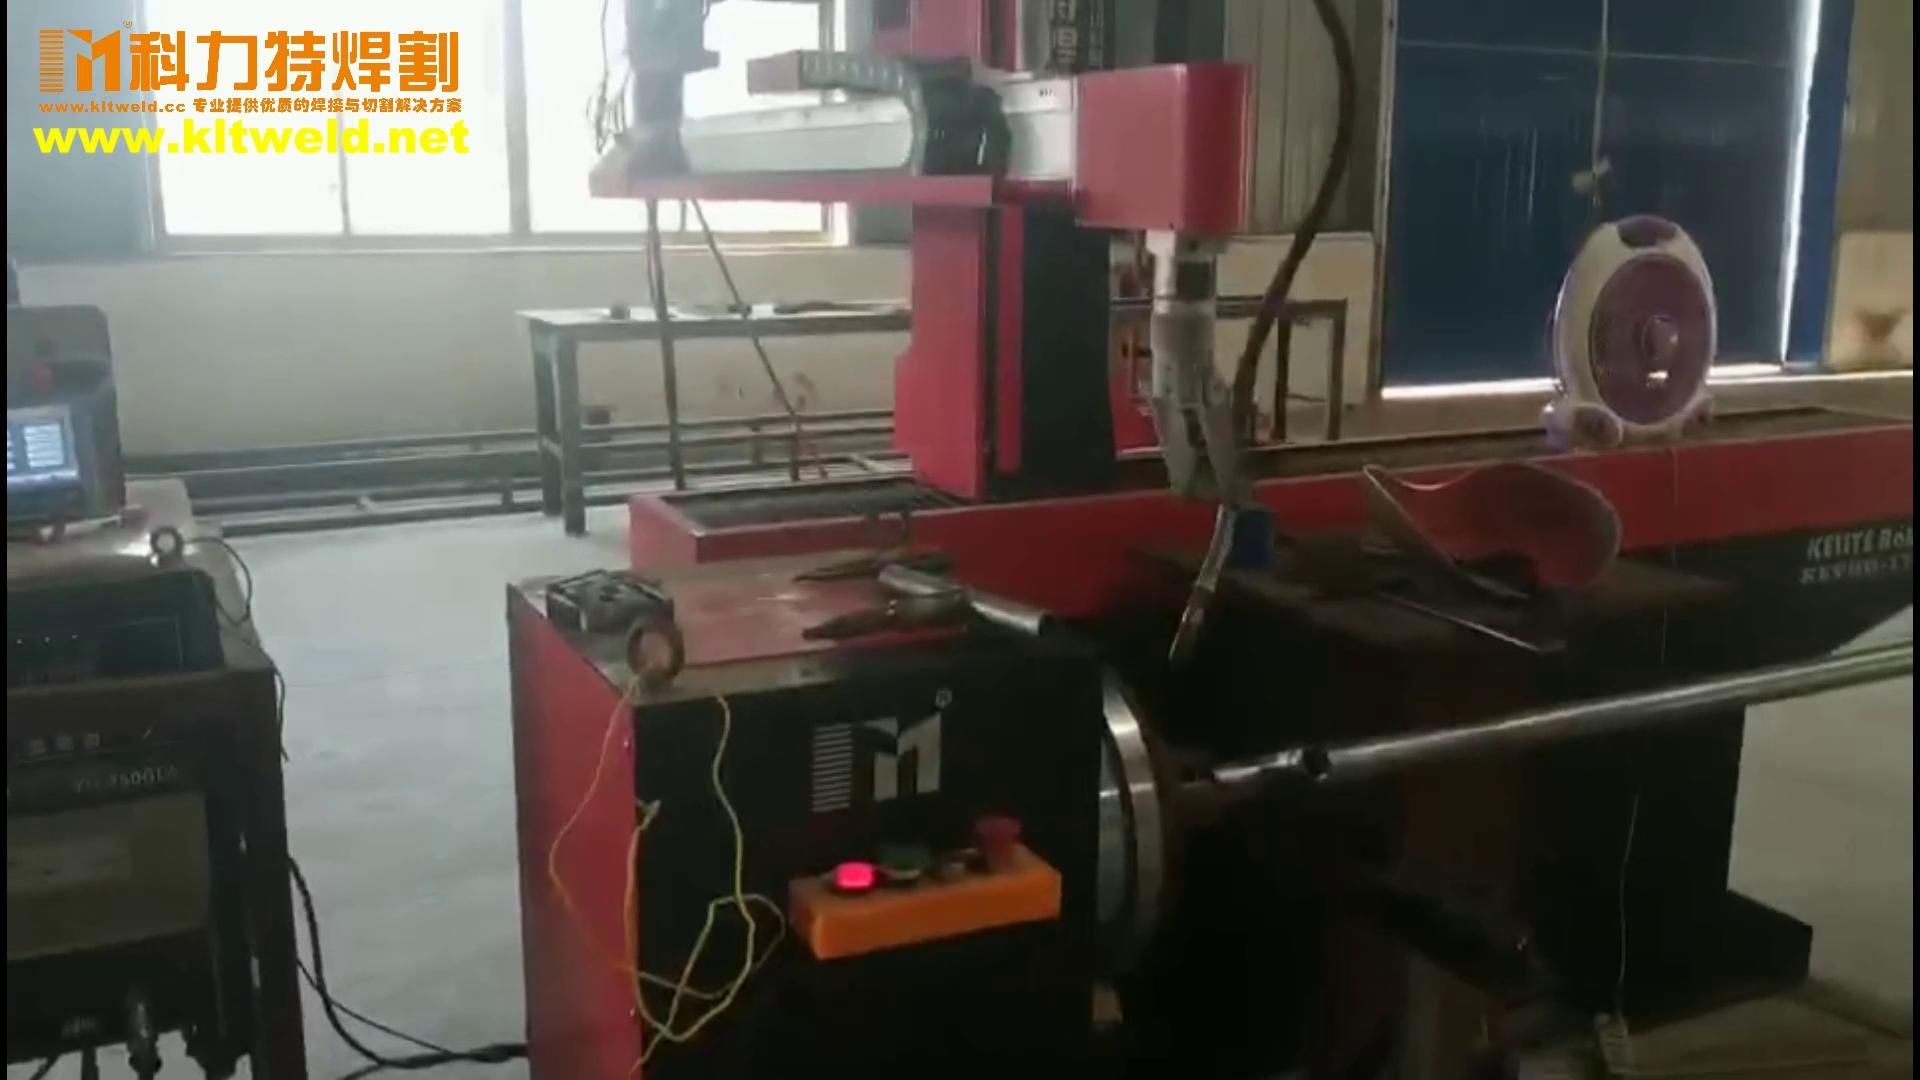 Cnc welding robot includes servo dual axis positioner